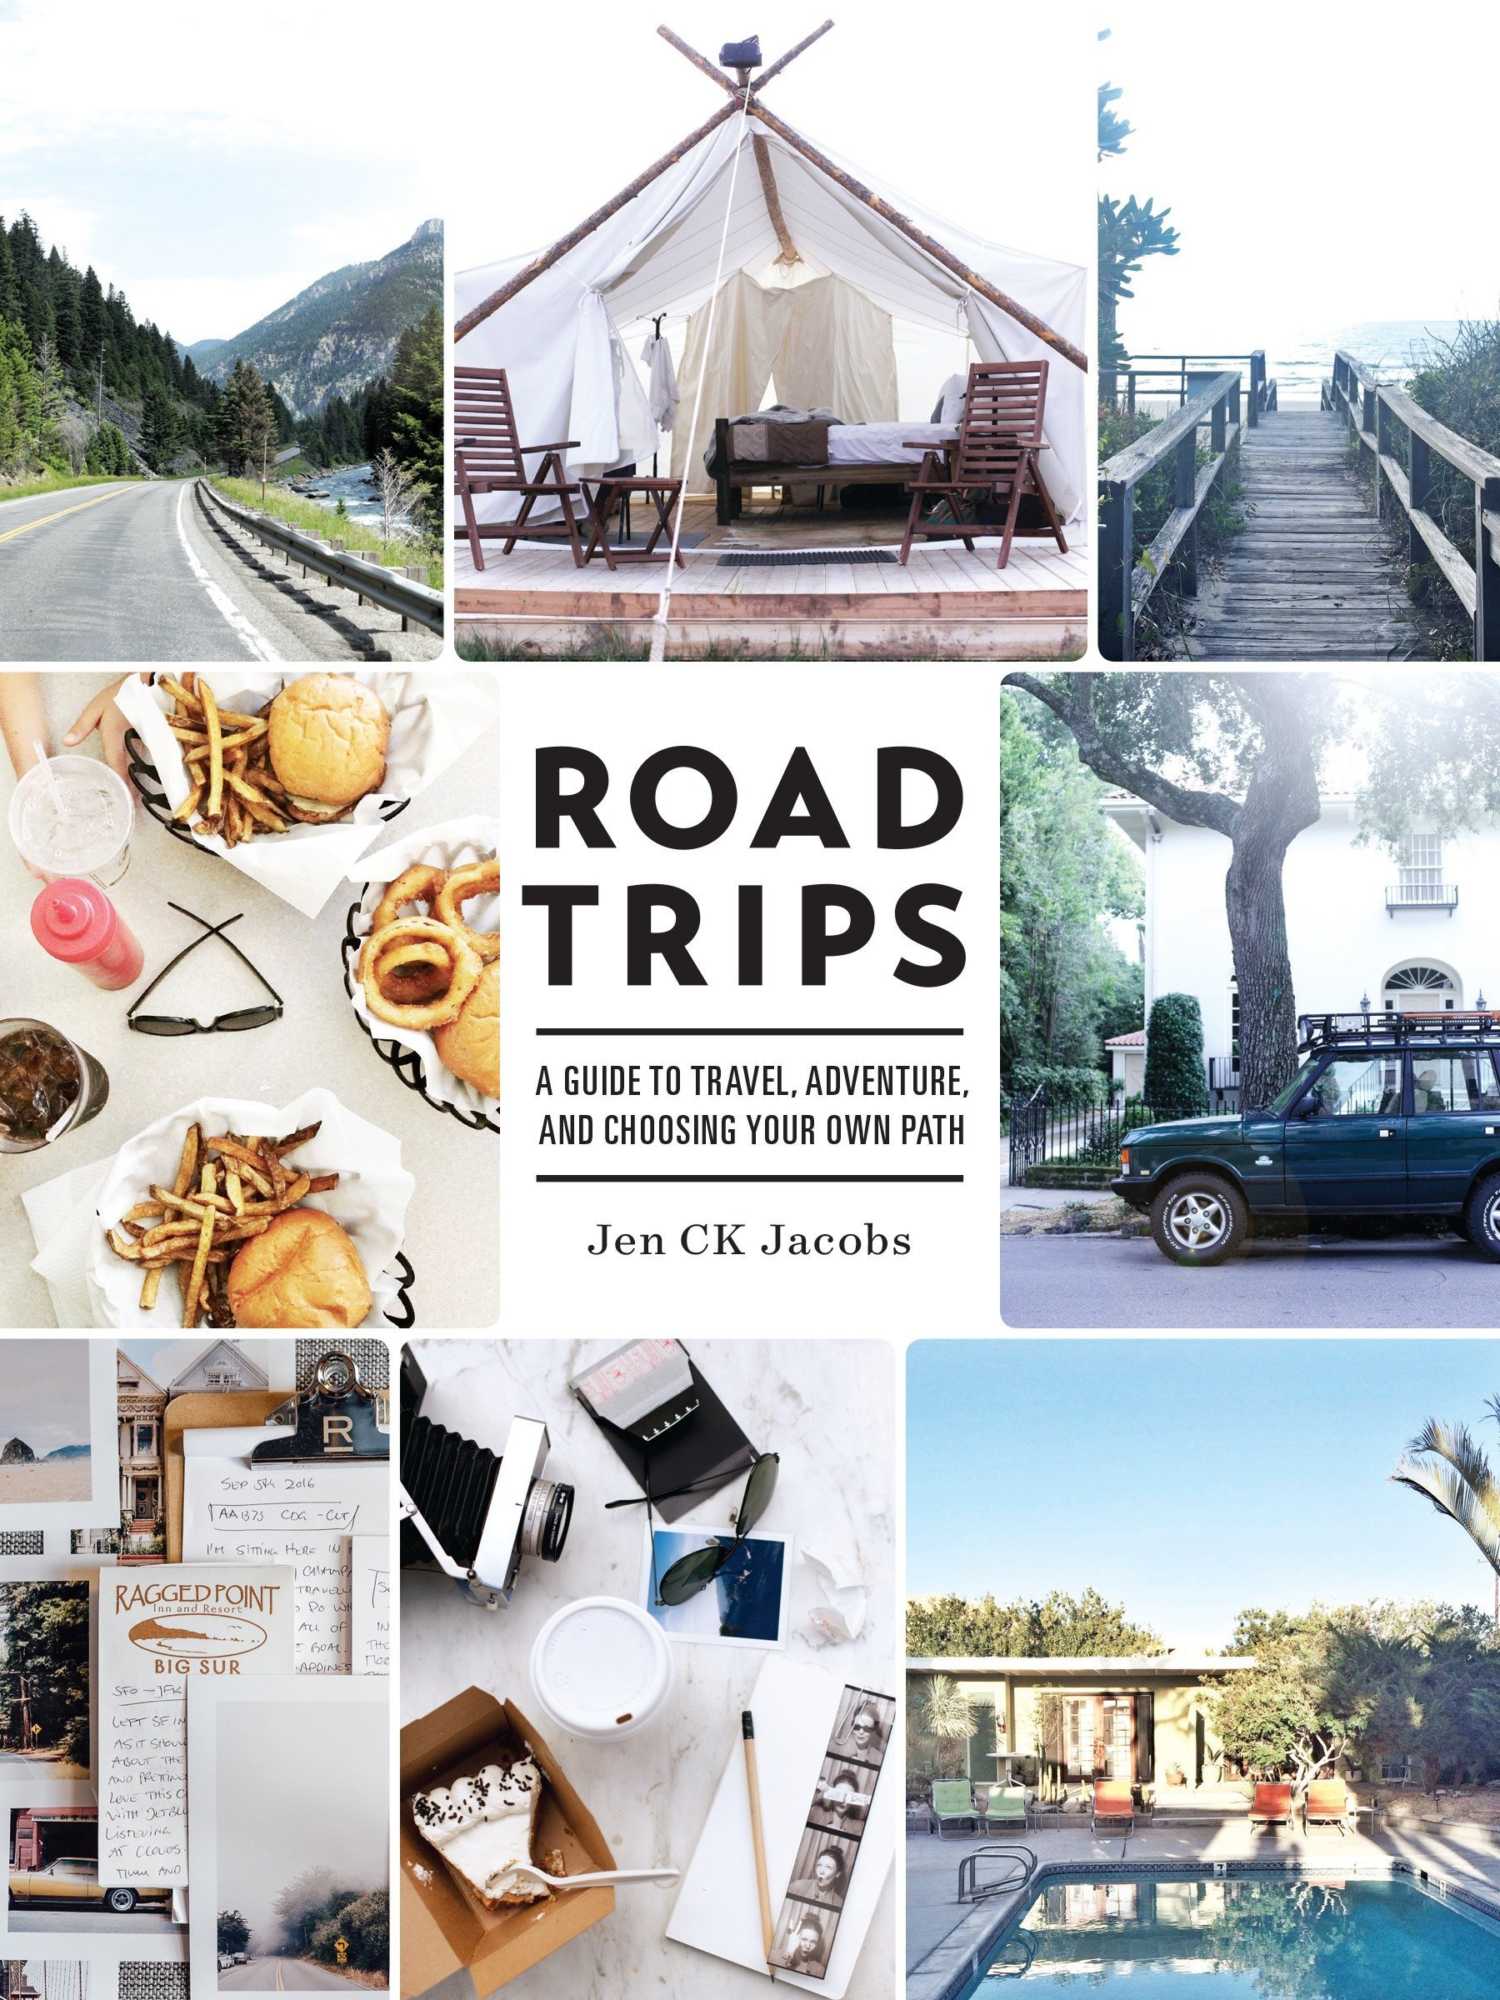 Comprar Road Trips: A Guide to Travel, Adventure, Choosing Your Own Path